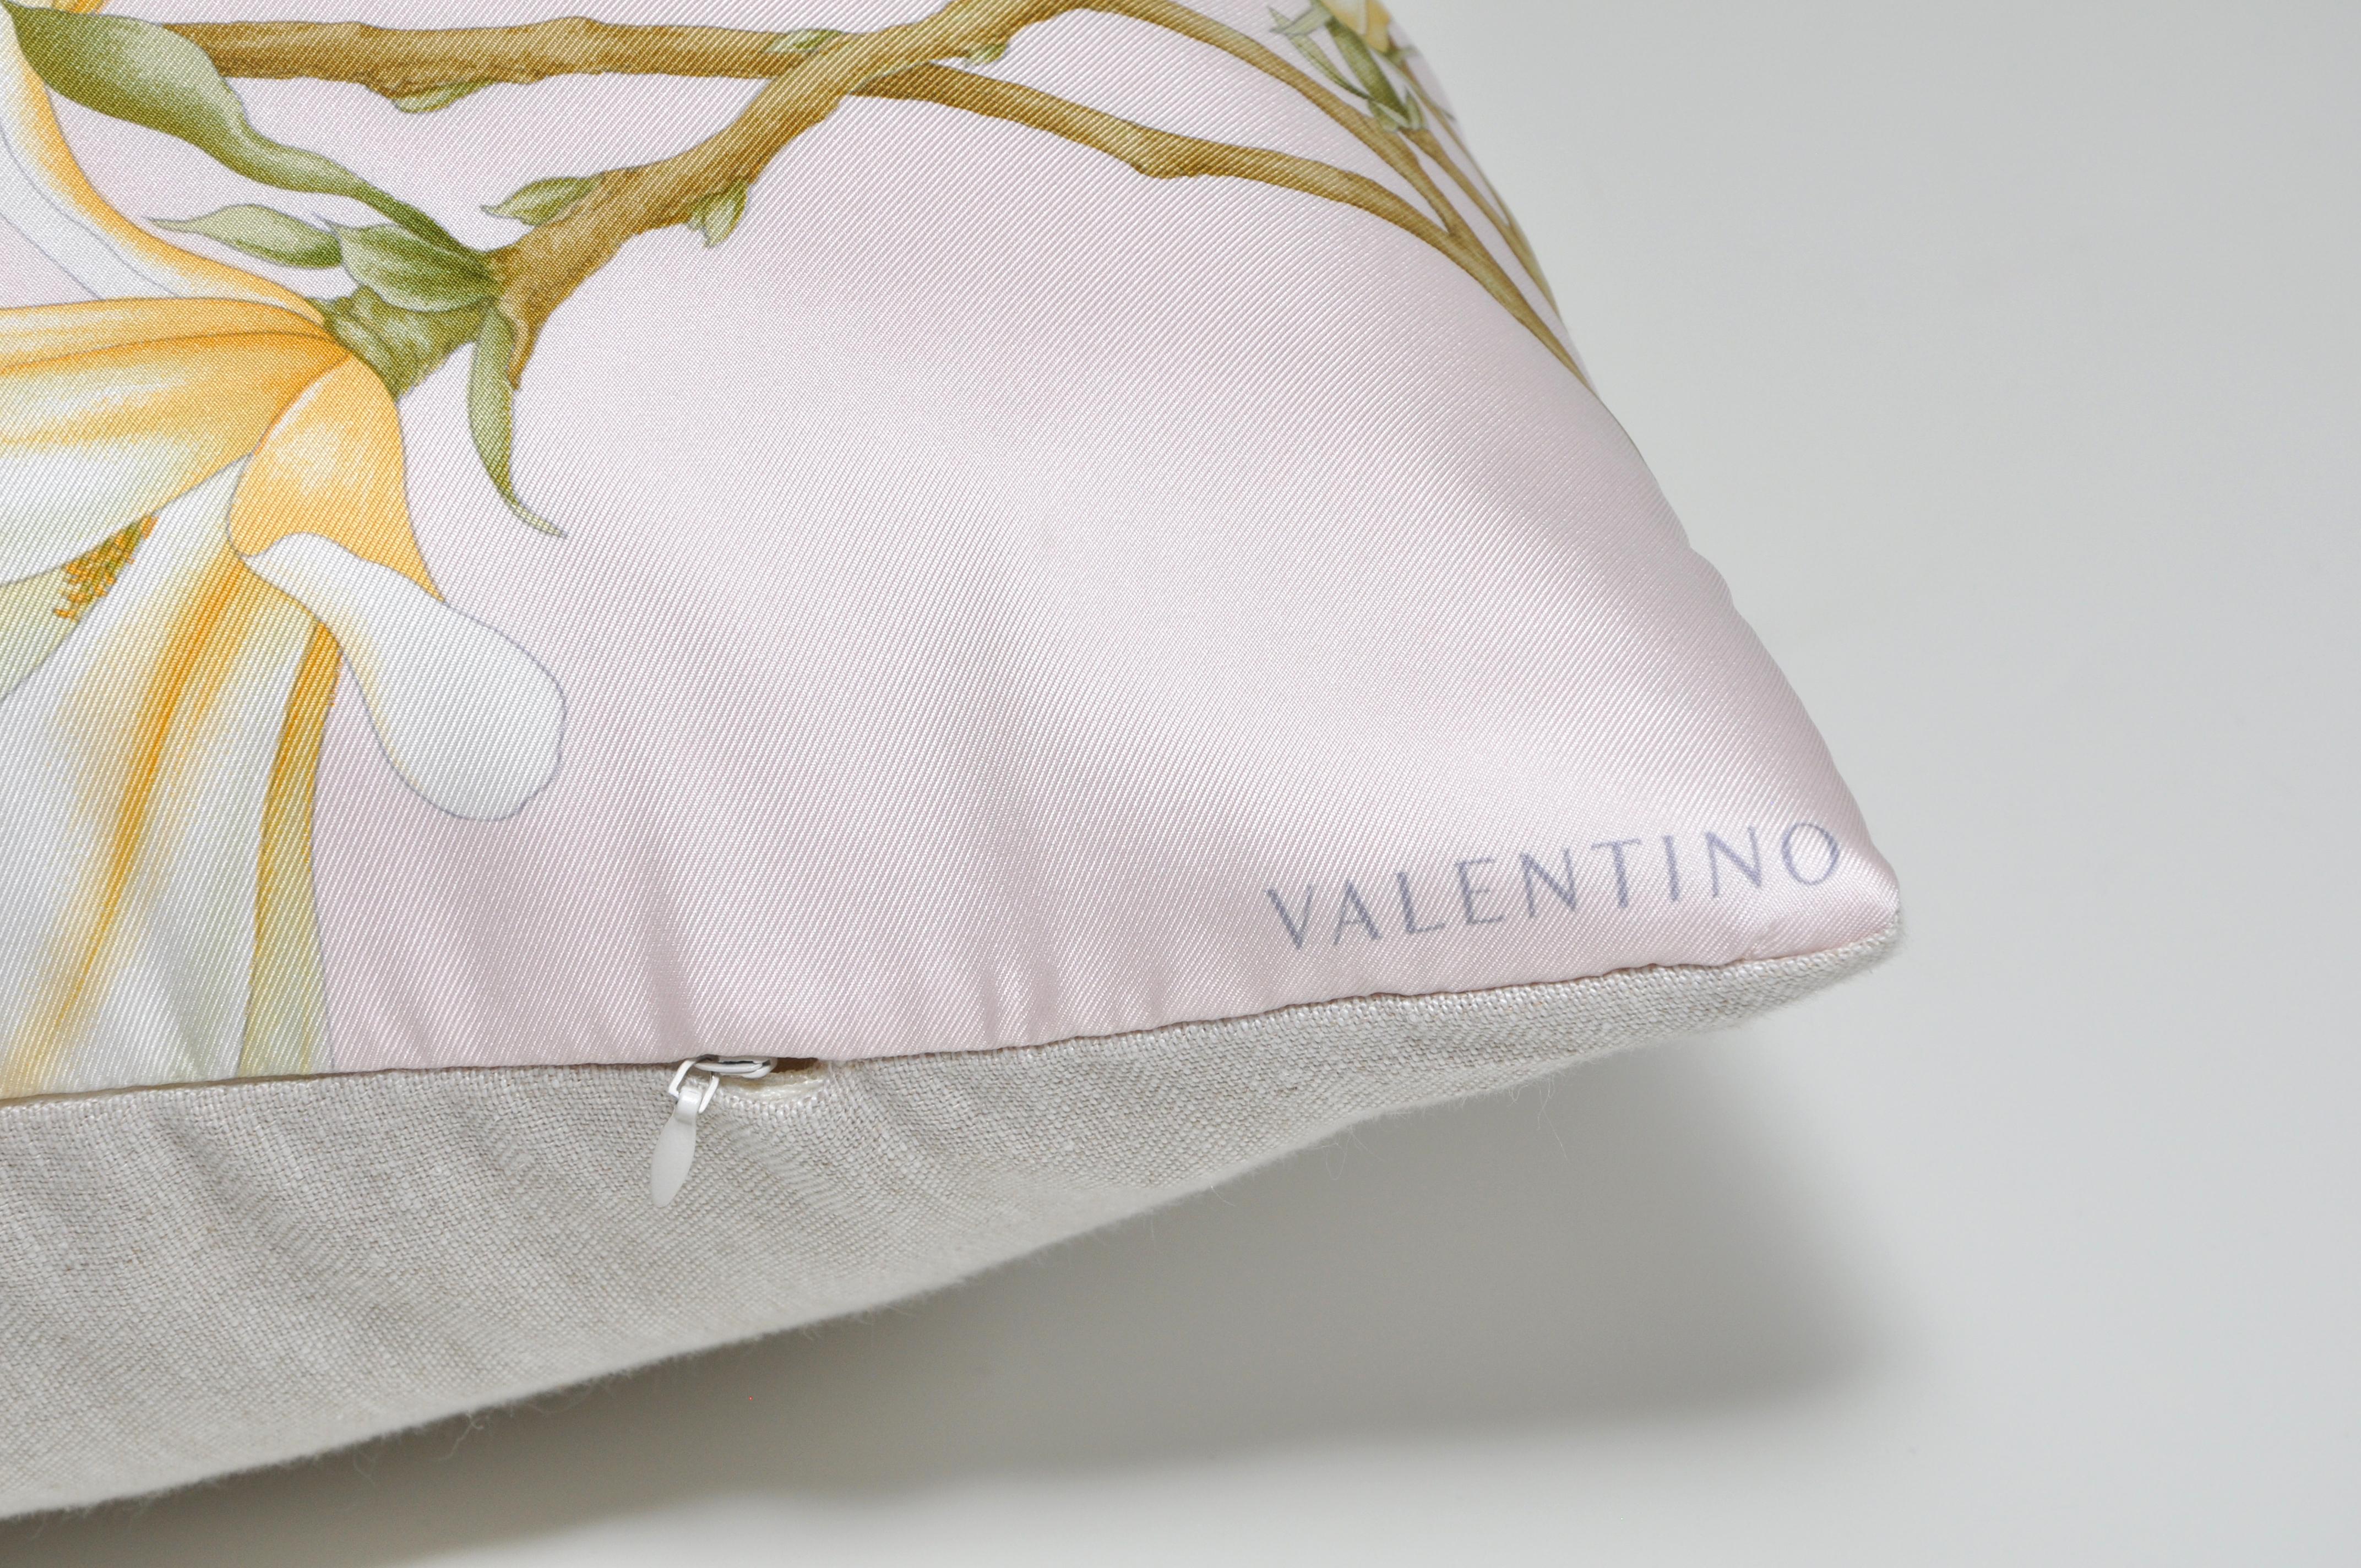 A large custom made one of a kind cushion (pillow) created from a stunning rare vintage Valentino silk fashion scarf in an extremely elegant design. In an exquisite soft ballet pale pink covered in luscious magnolia flowers in full bloom. Like a